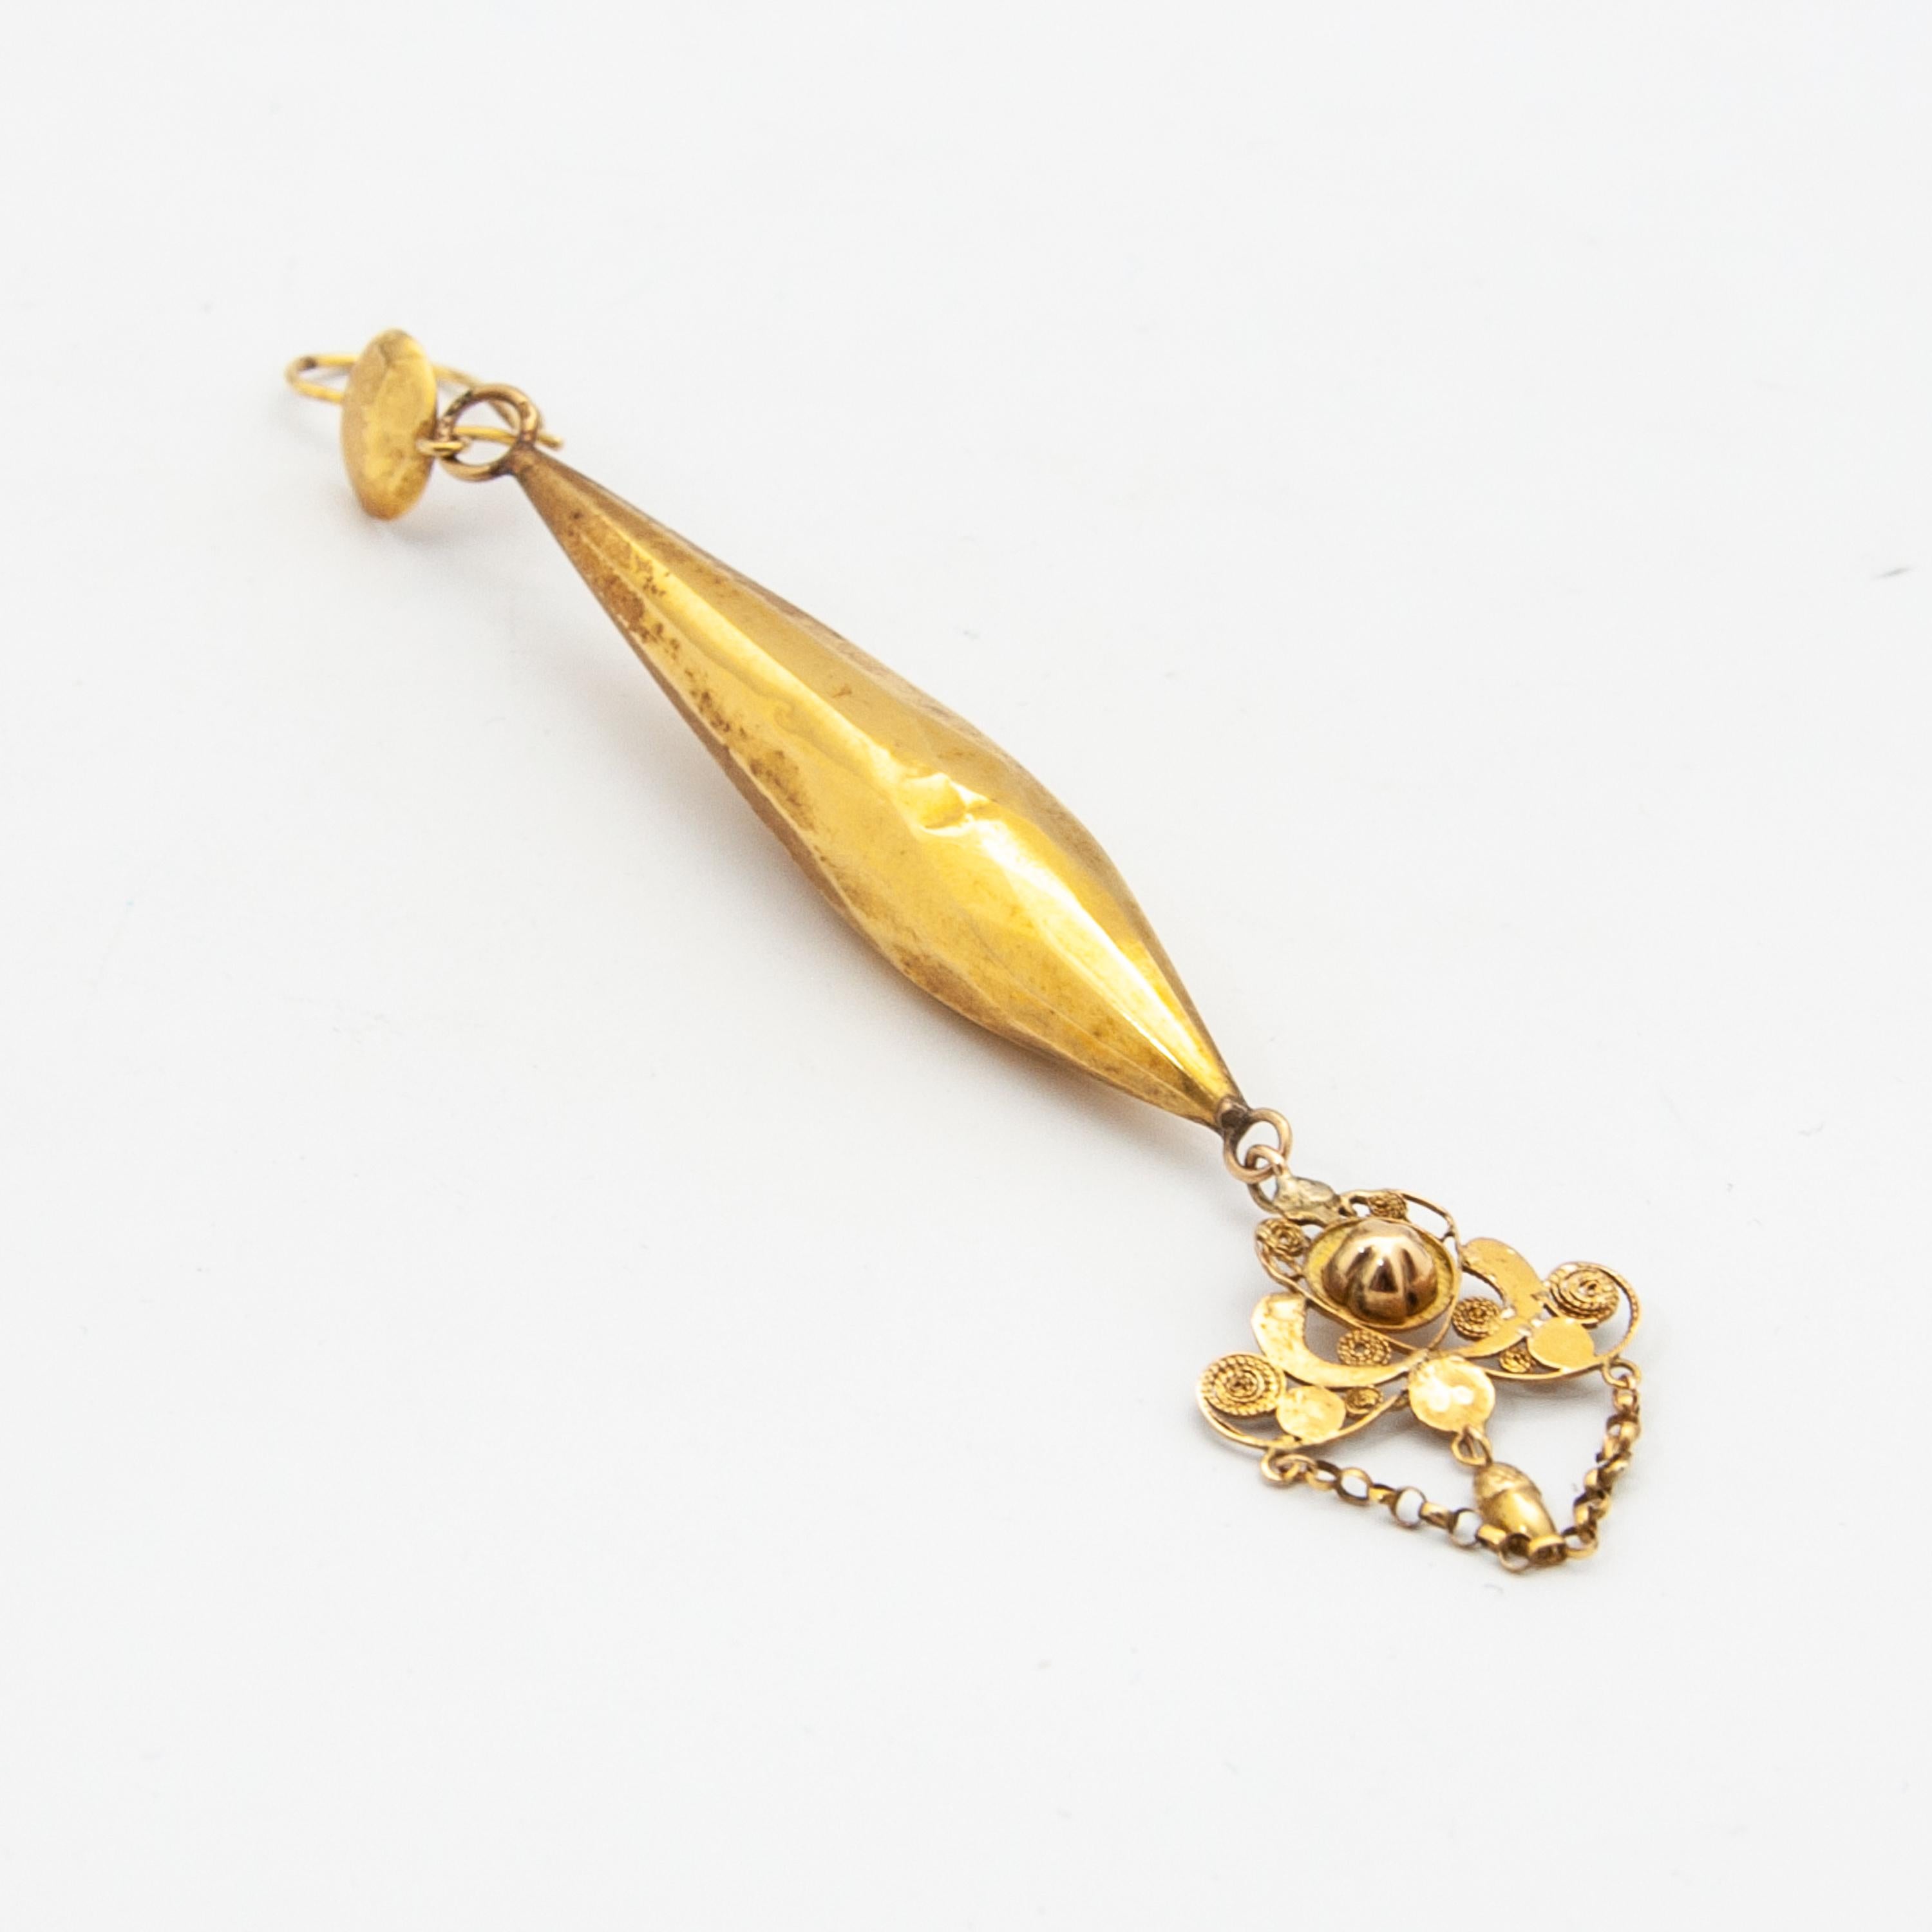 This antique earring is made in the 19th century and created in 14 karat yellow gold. These kind of earrings were worn by woman from the province of North-Brabant in 19th century. The bottom of the earring has a fine cannetille work design with an